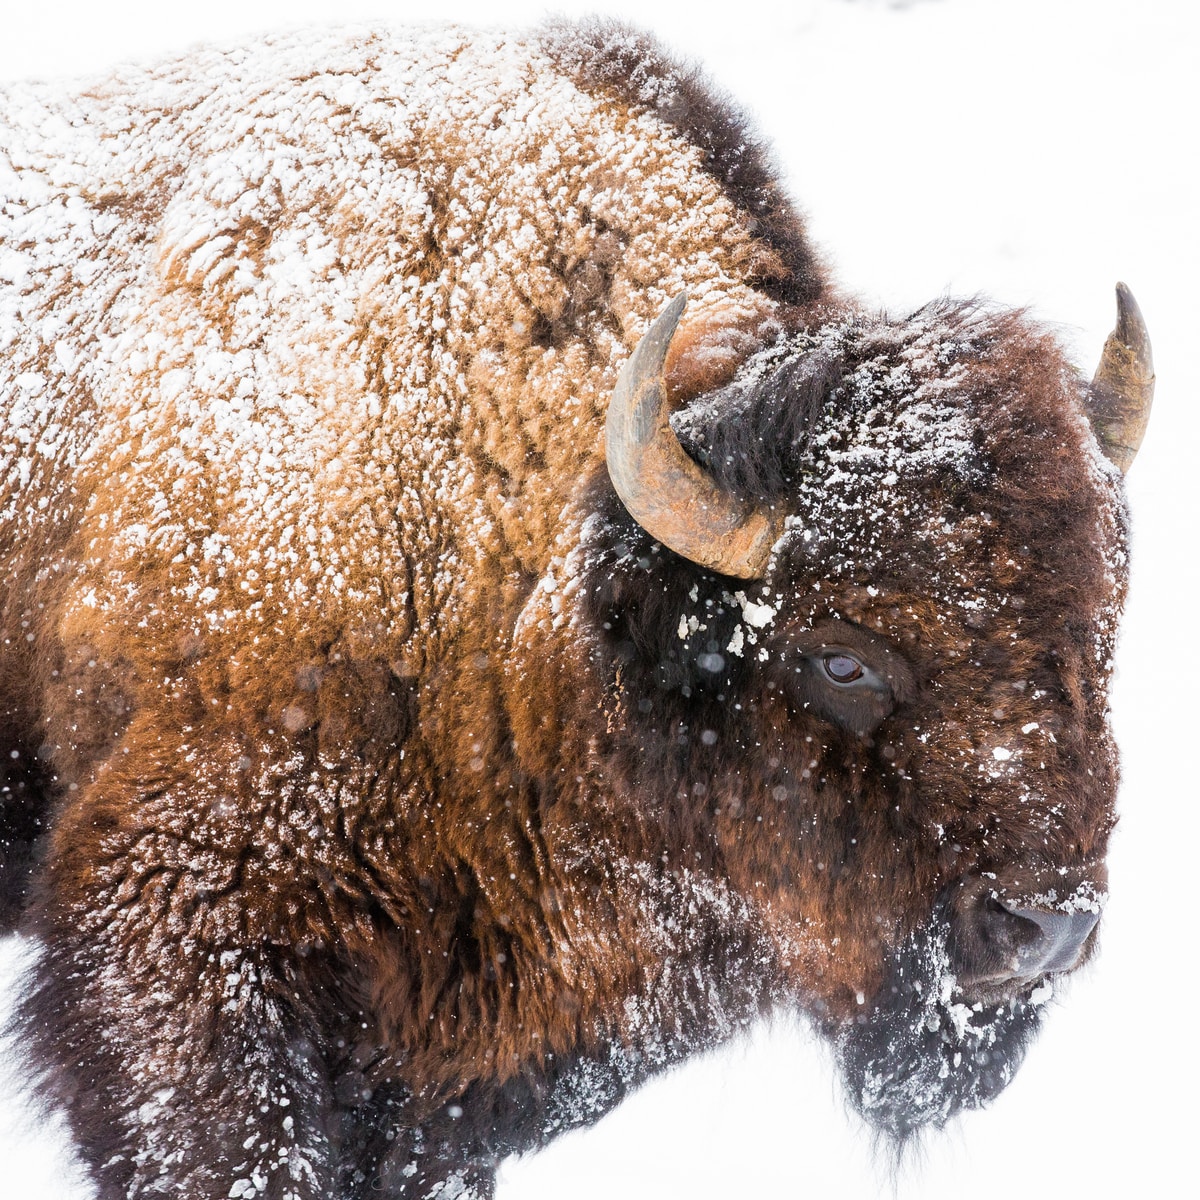 brown bison on snow covered ground during daytime